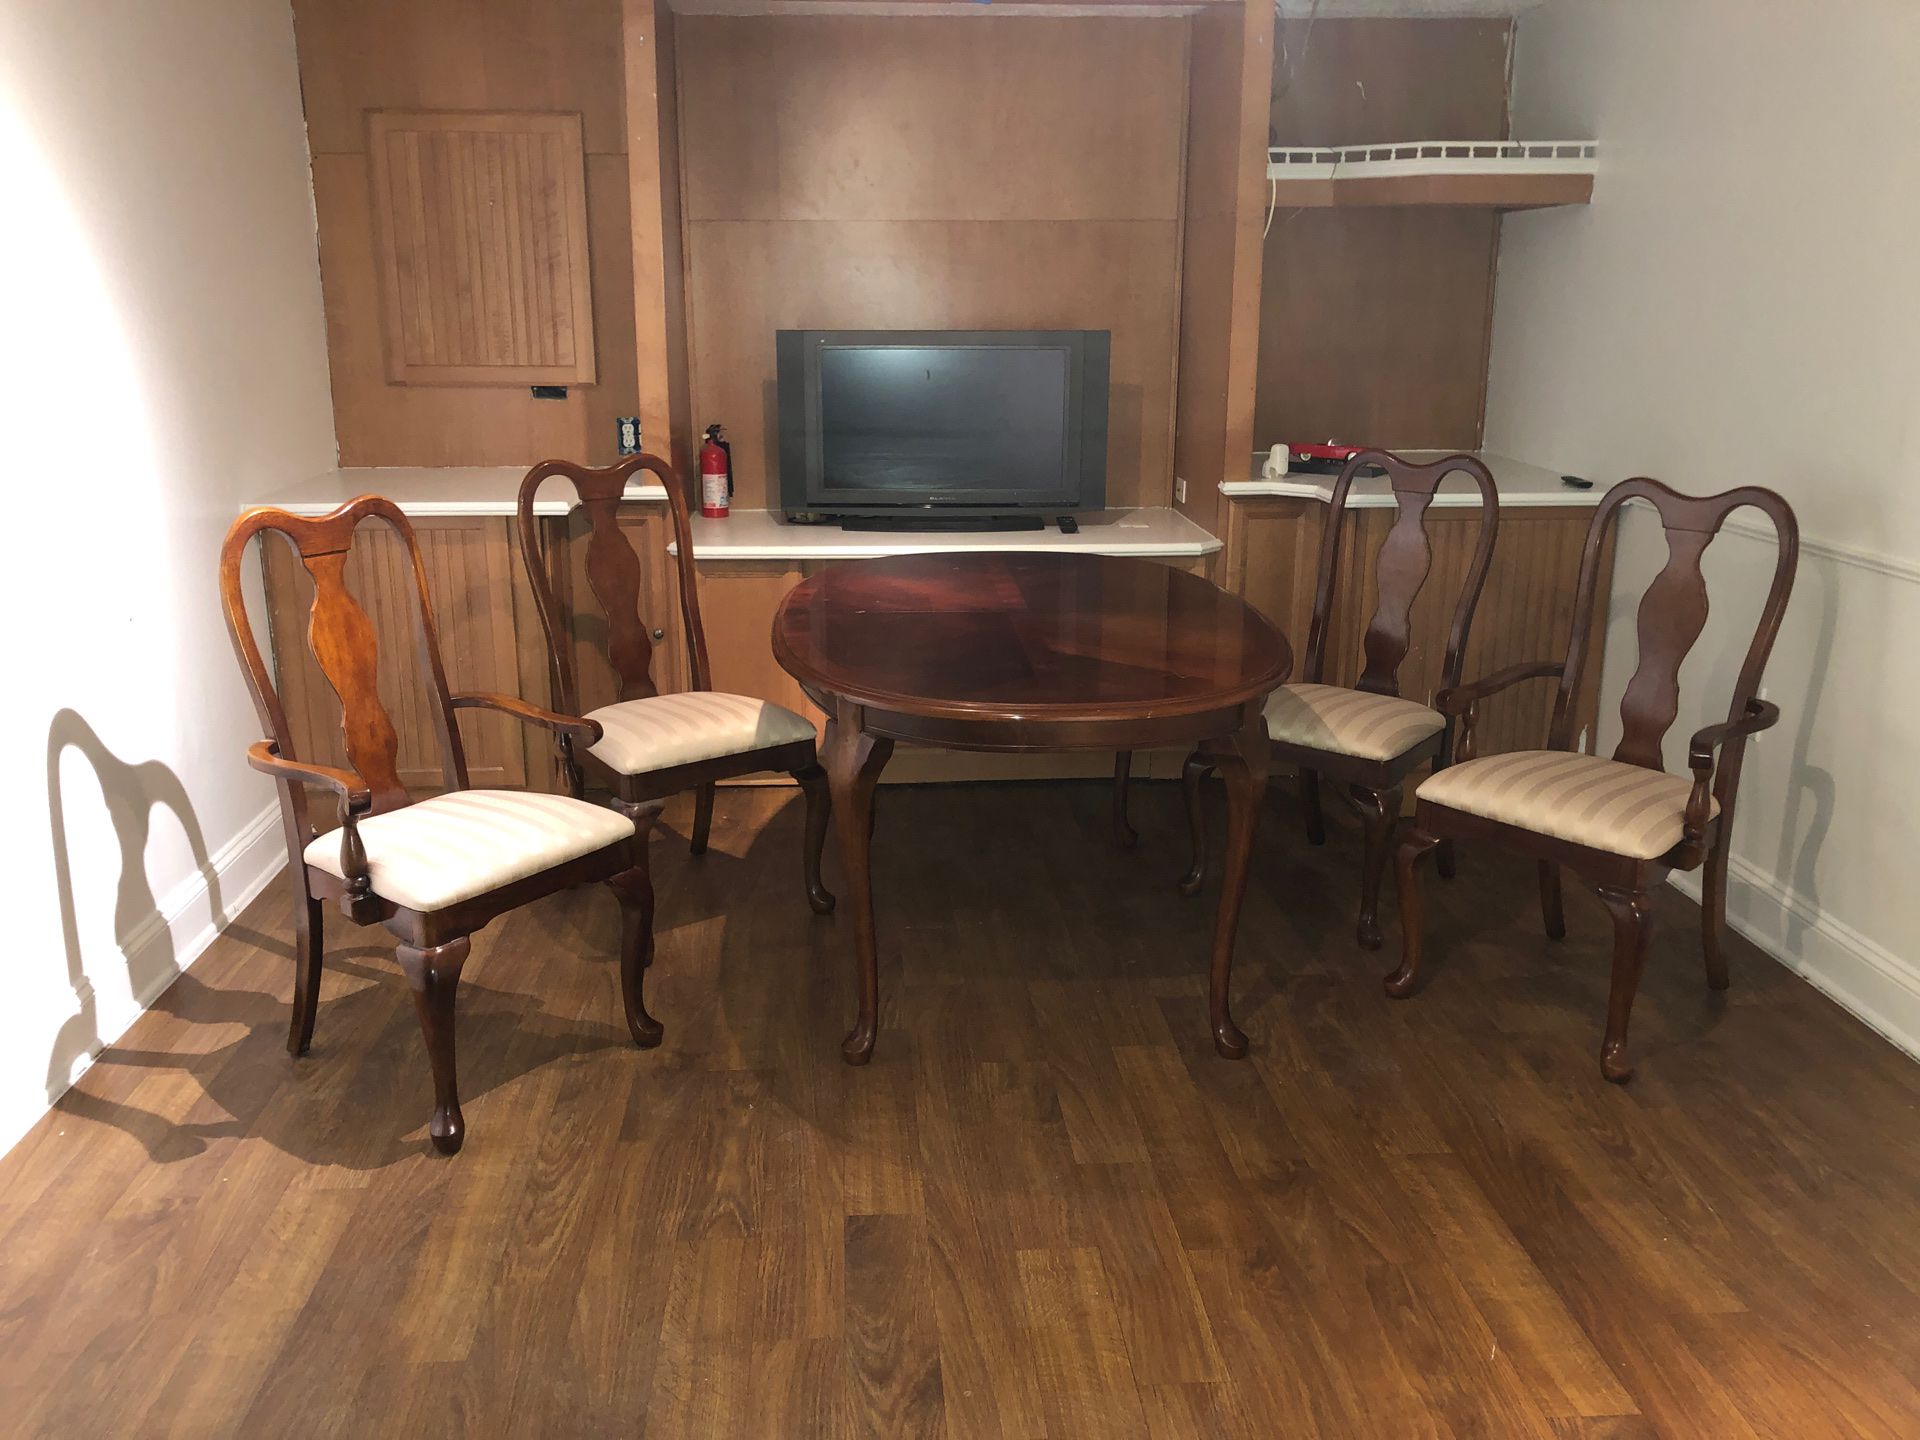 Full dining room set, fine wood, it has matching chest